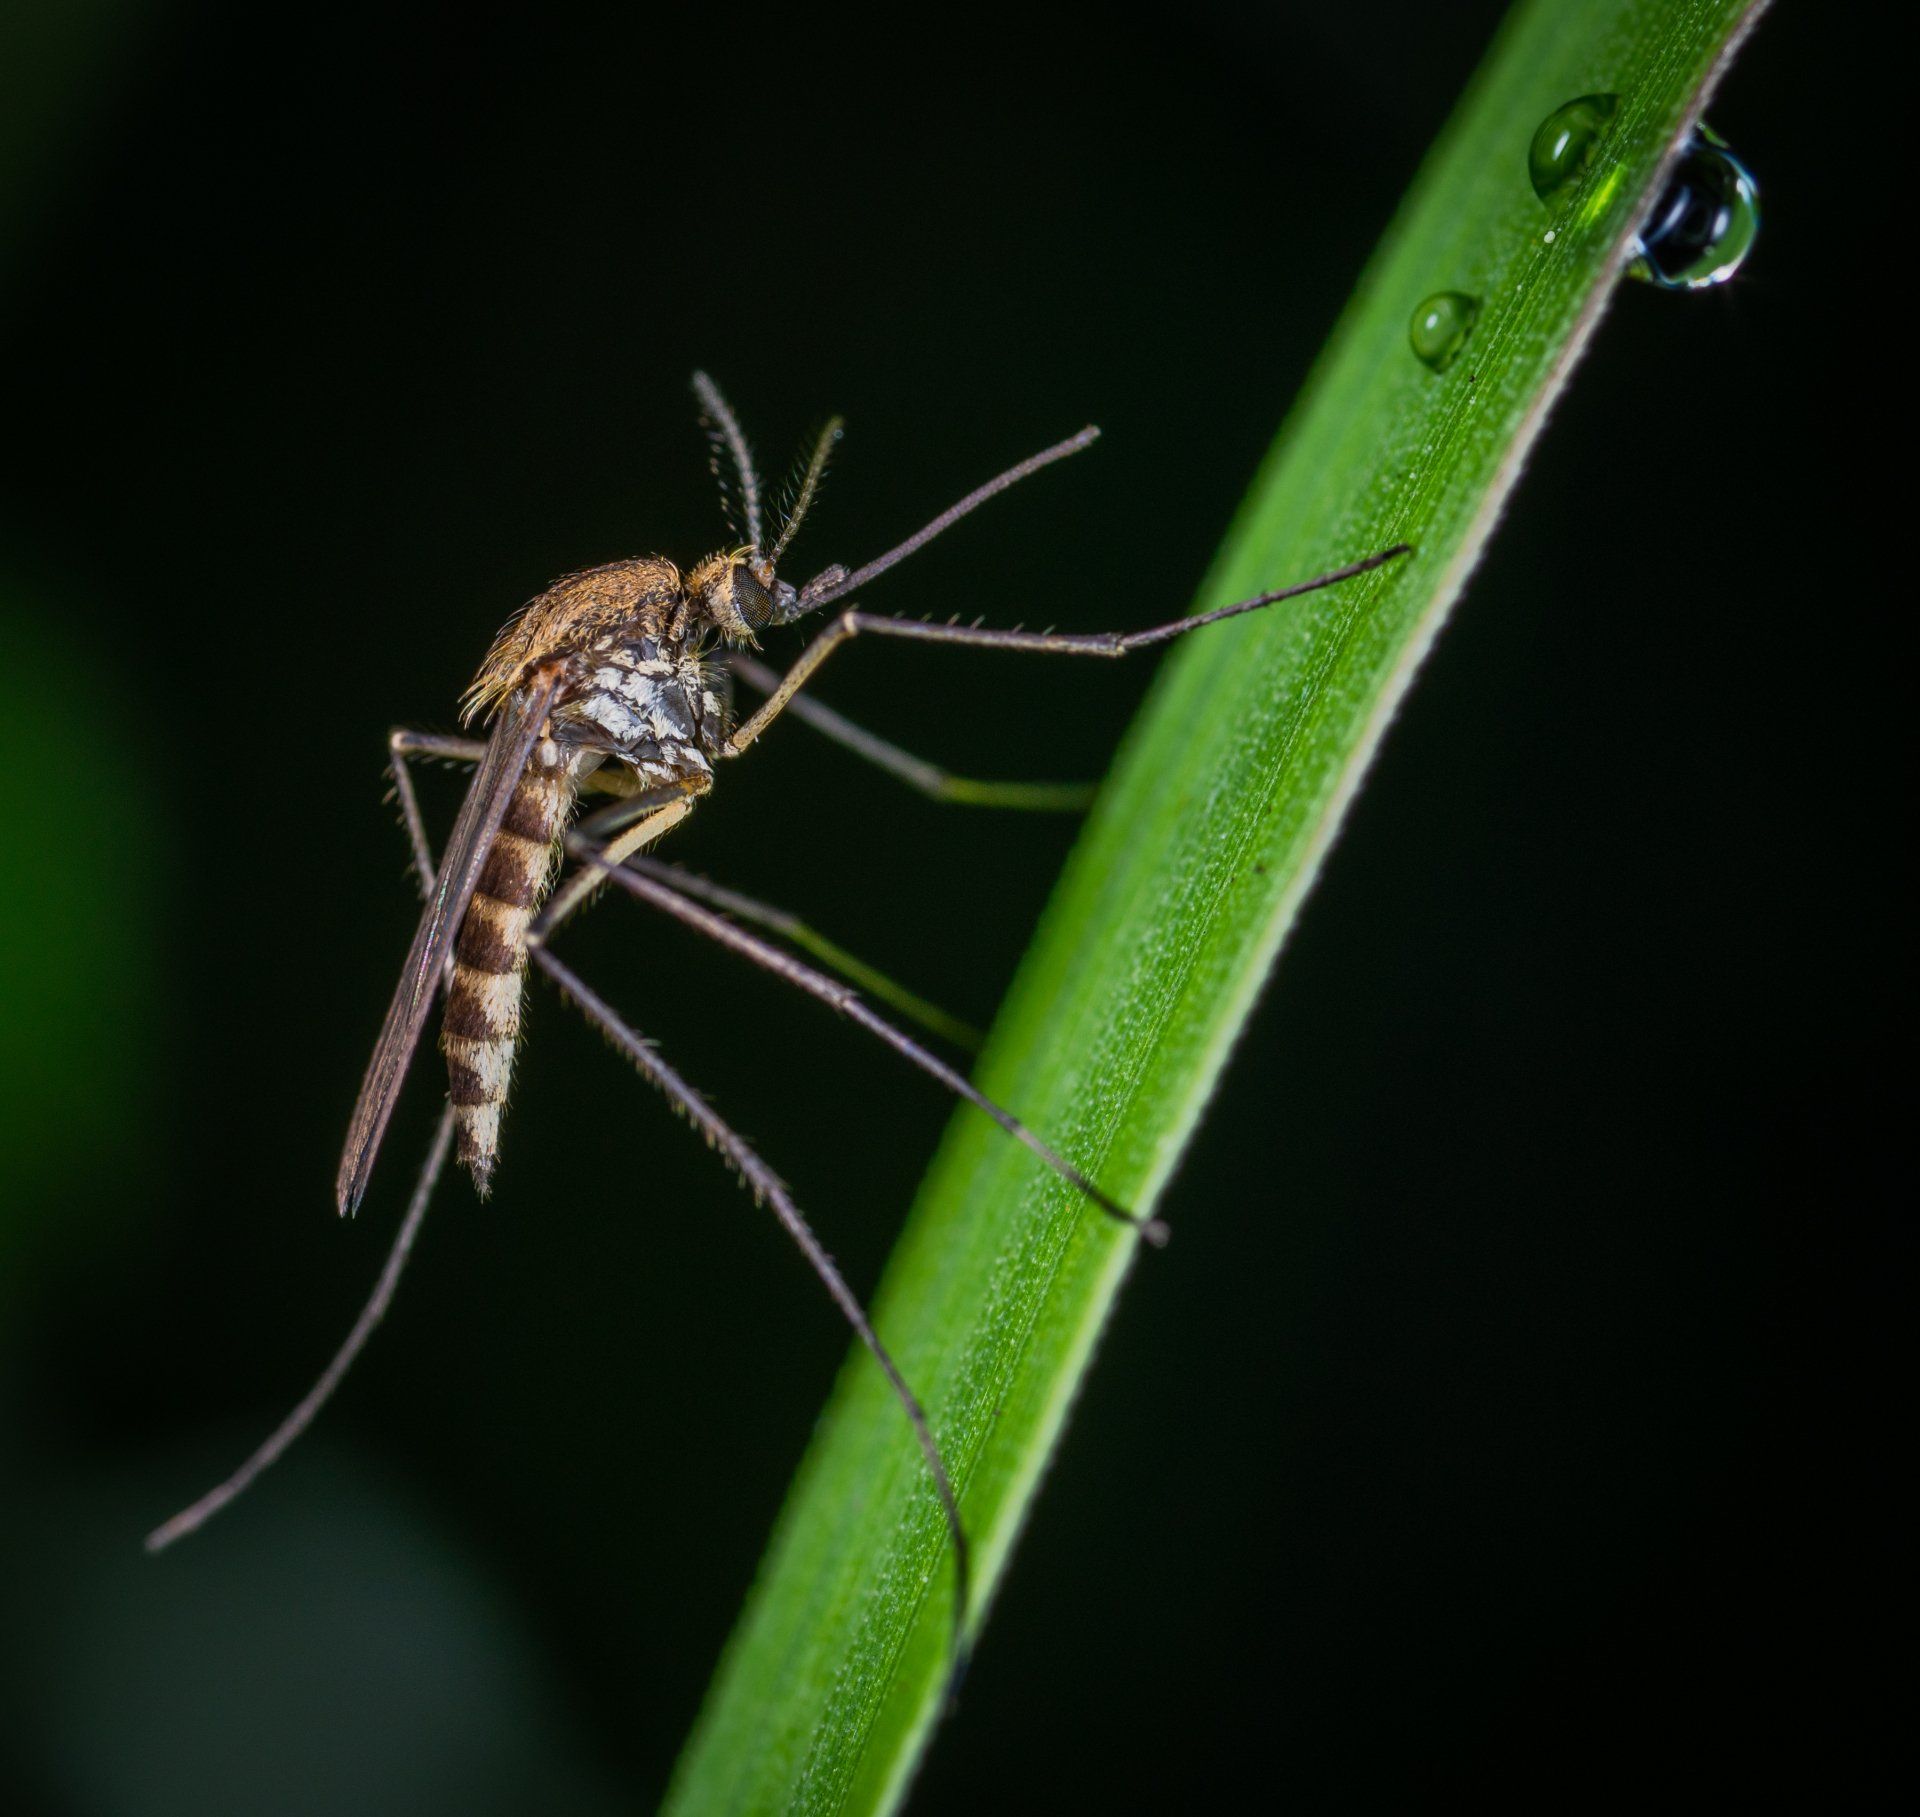 Mosquito Pest Control In New Braunfels, TX